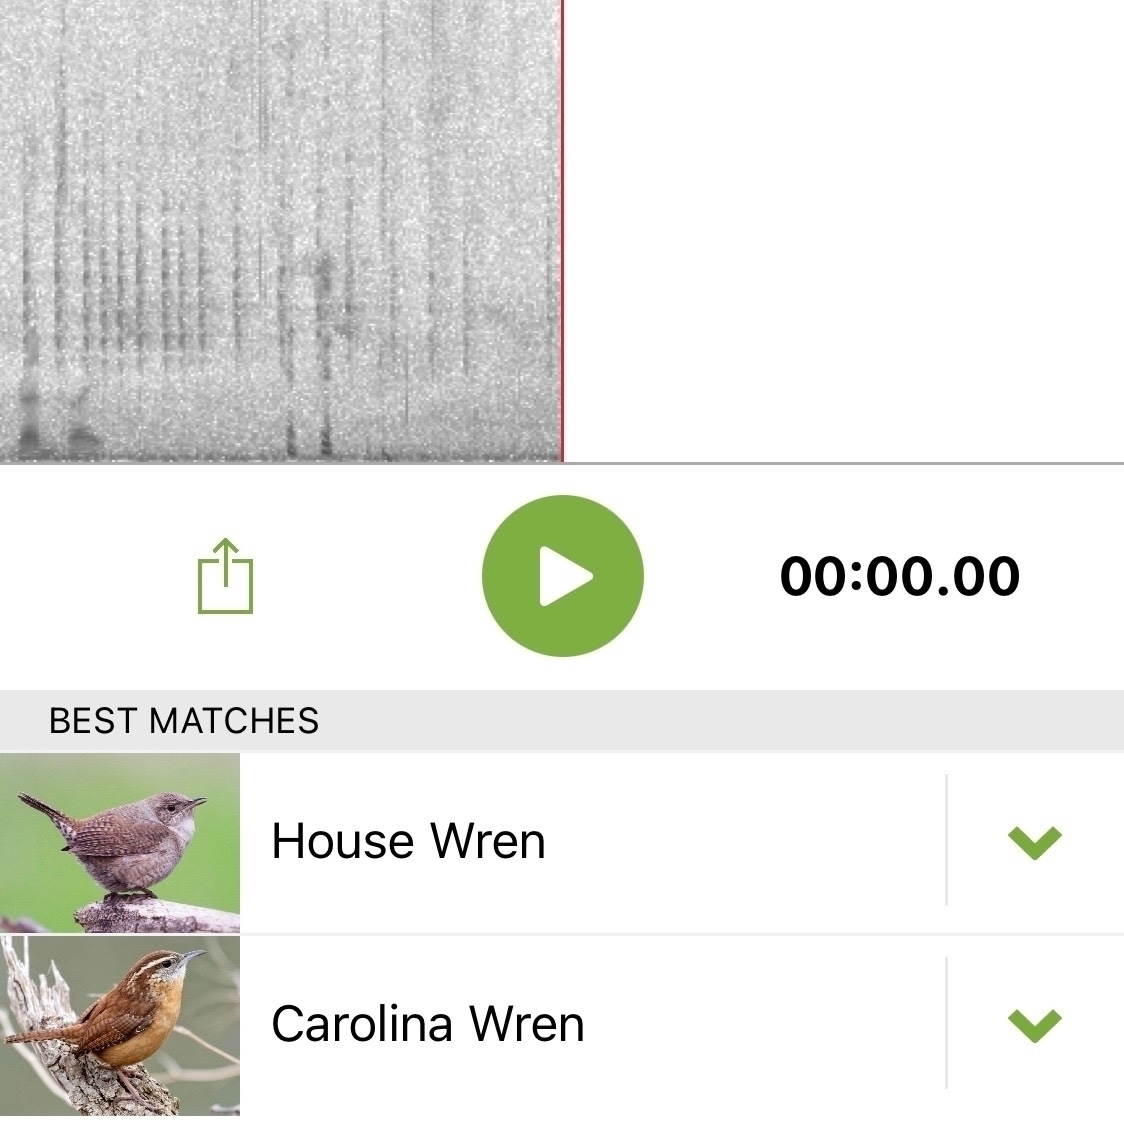 Auto-generated description: The image shows a spectrogram of a bird call at the top, with an interface indicating a bird song identification app below, displaying two types of birds, the House Wren and Carolina Wren, as the best matches for the audio analyzed.